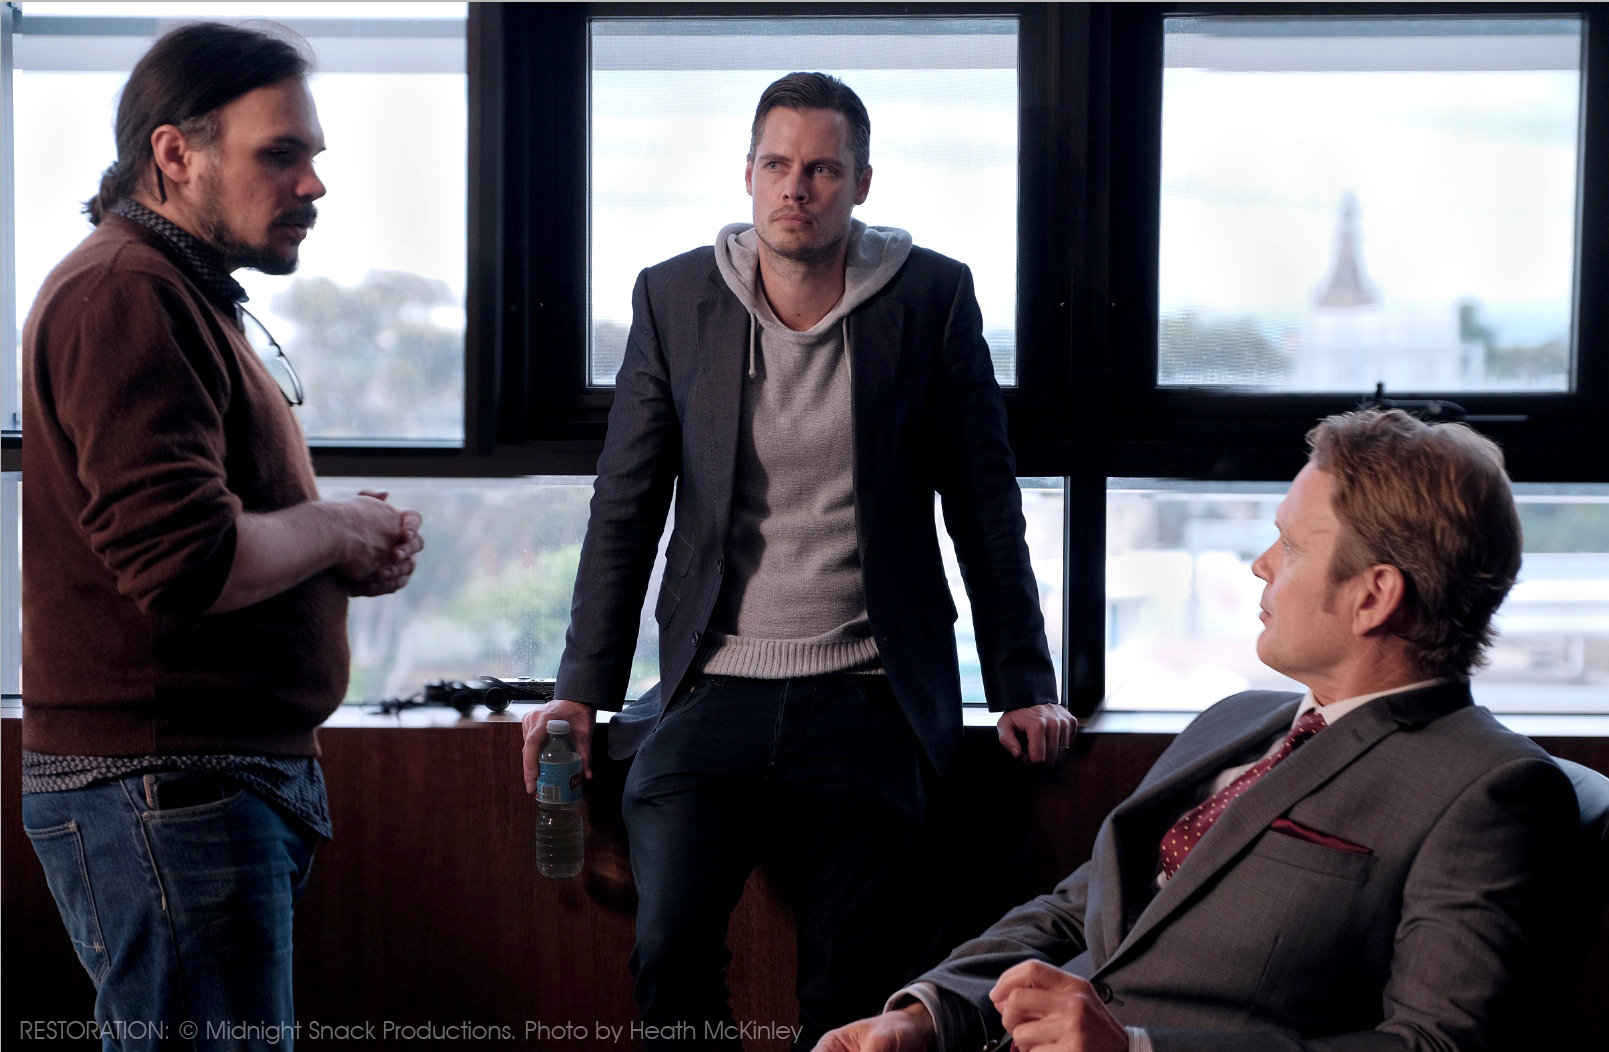 Director Stuart Willis and Producer Toby Gibson on set with actor Craig McLachlan